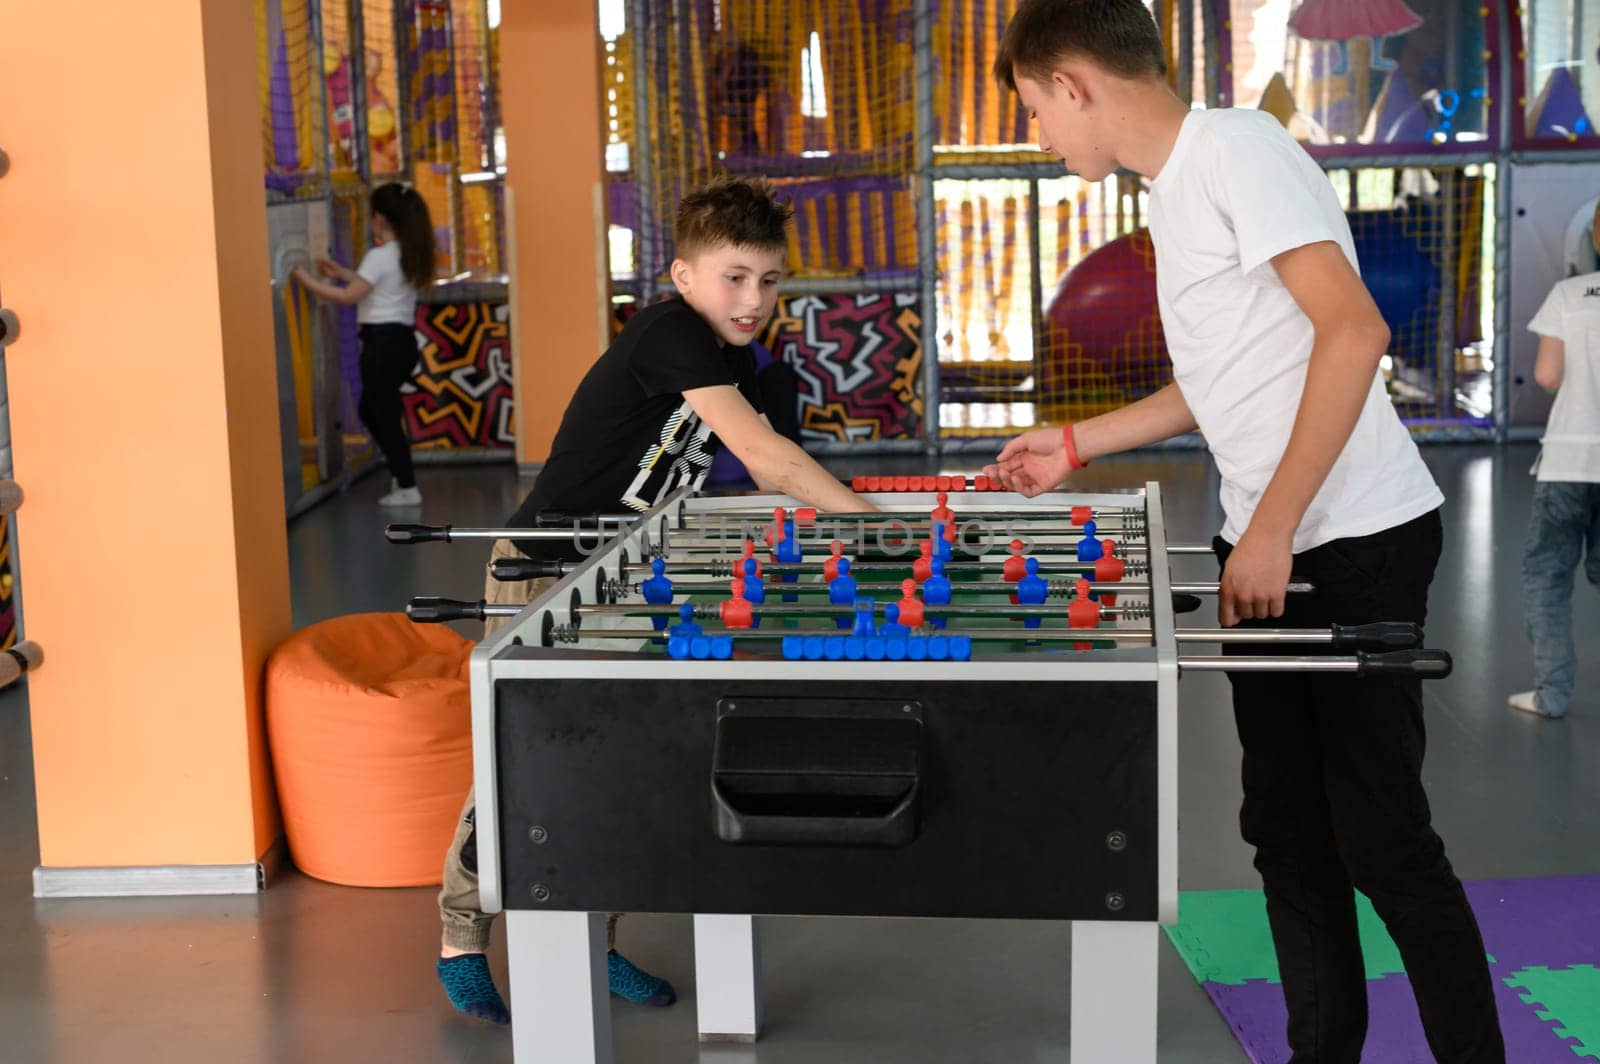 Two boys are playing table football in the playroom by Niko_Cingaryuk